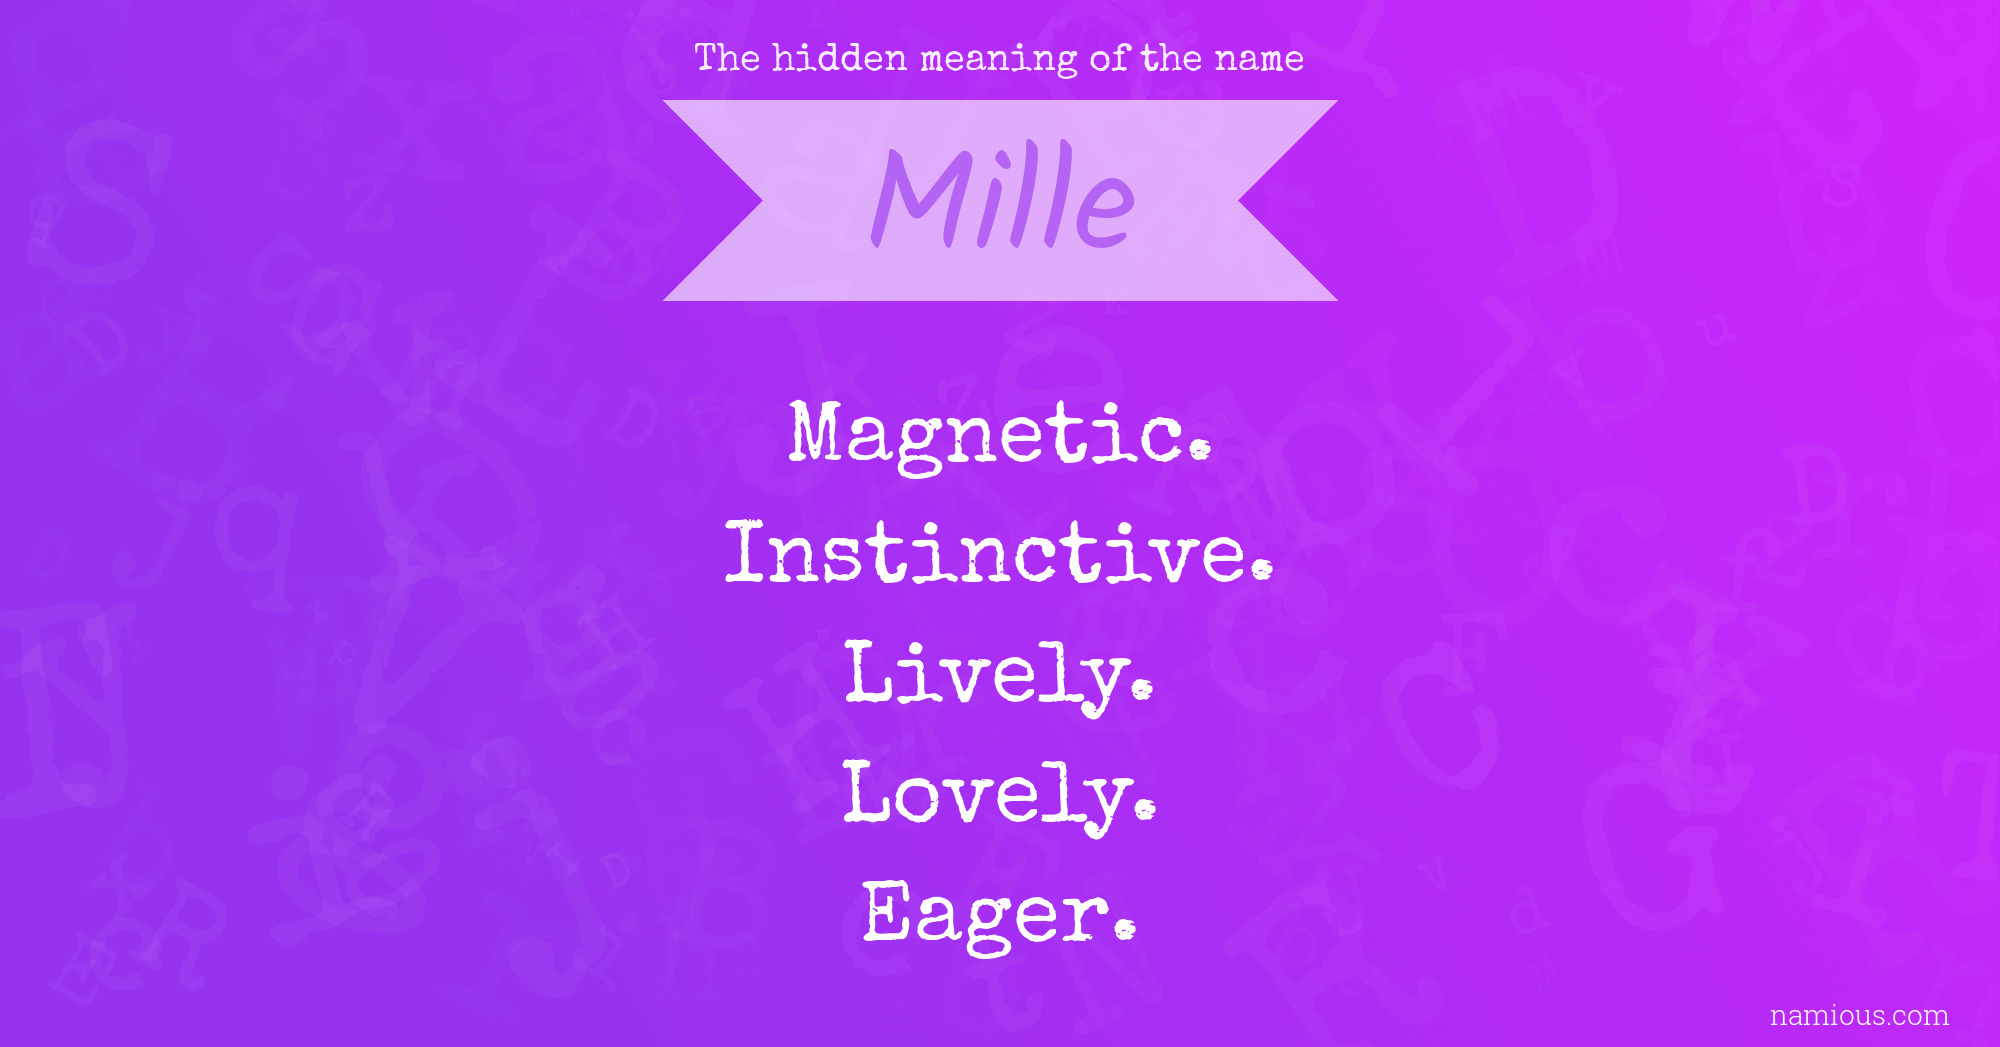 The hidden meaning of the name Mille